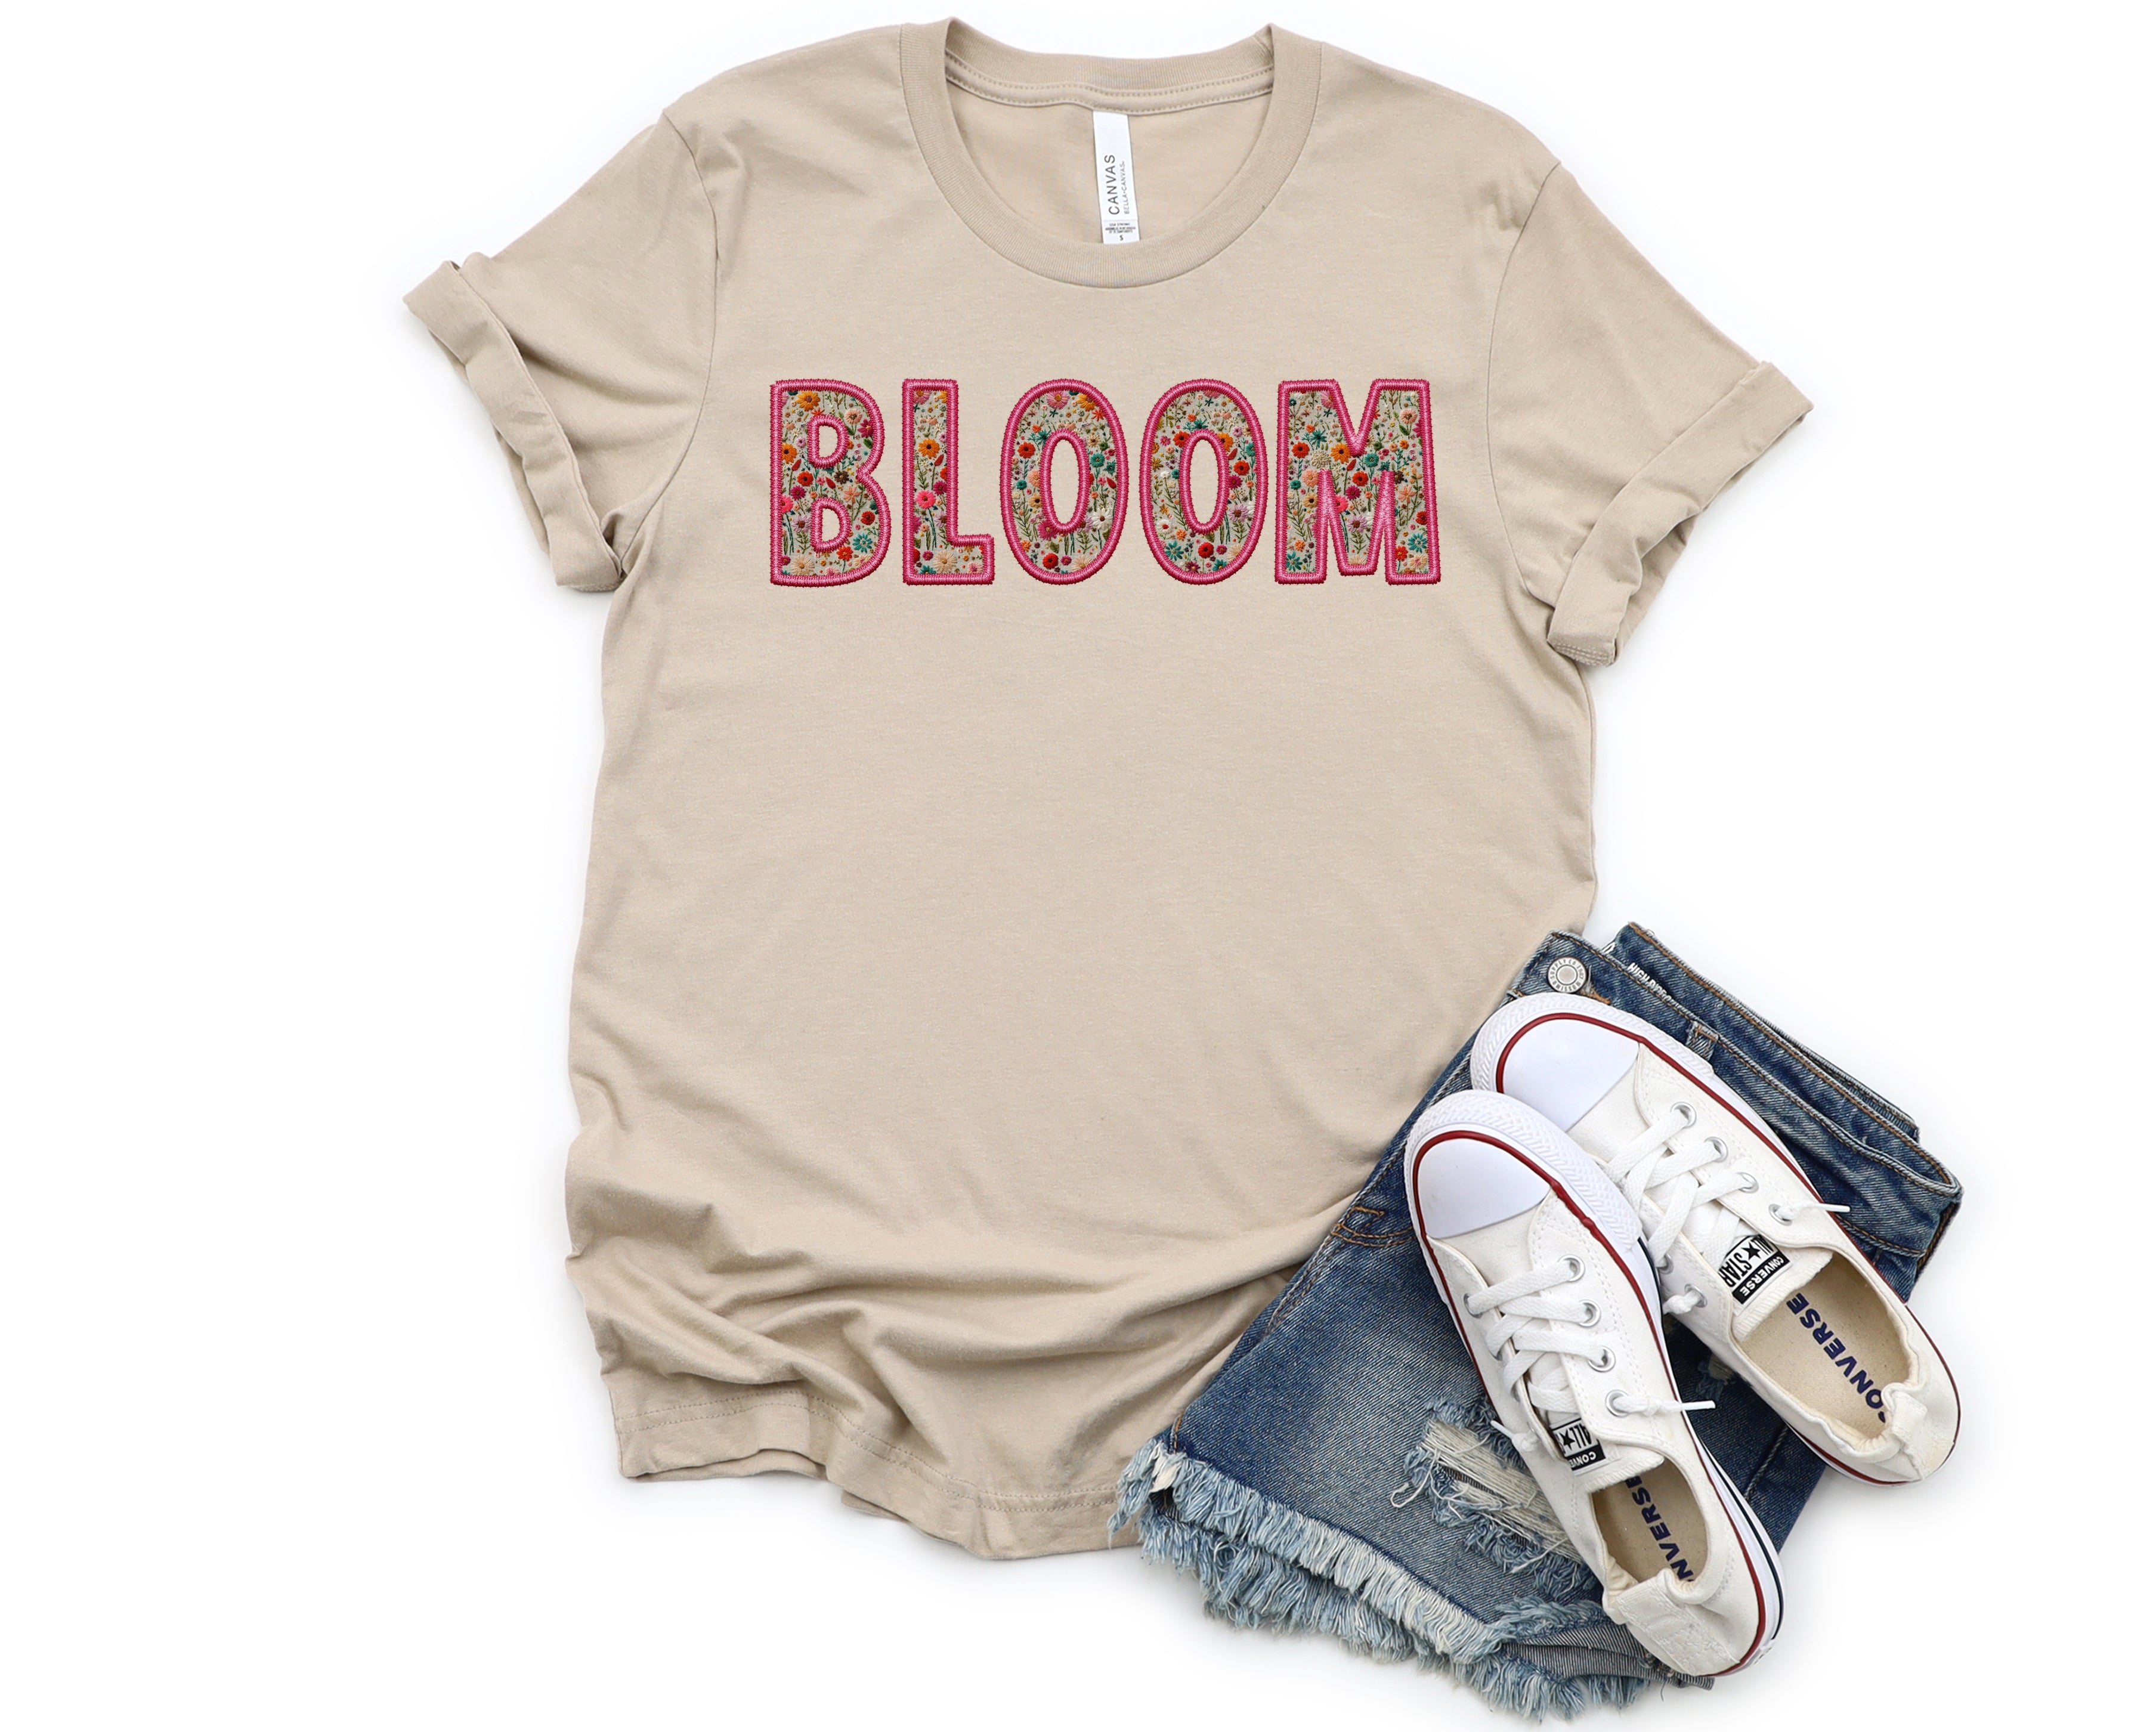 Bloom Embroidery